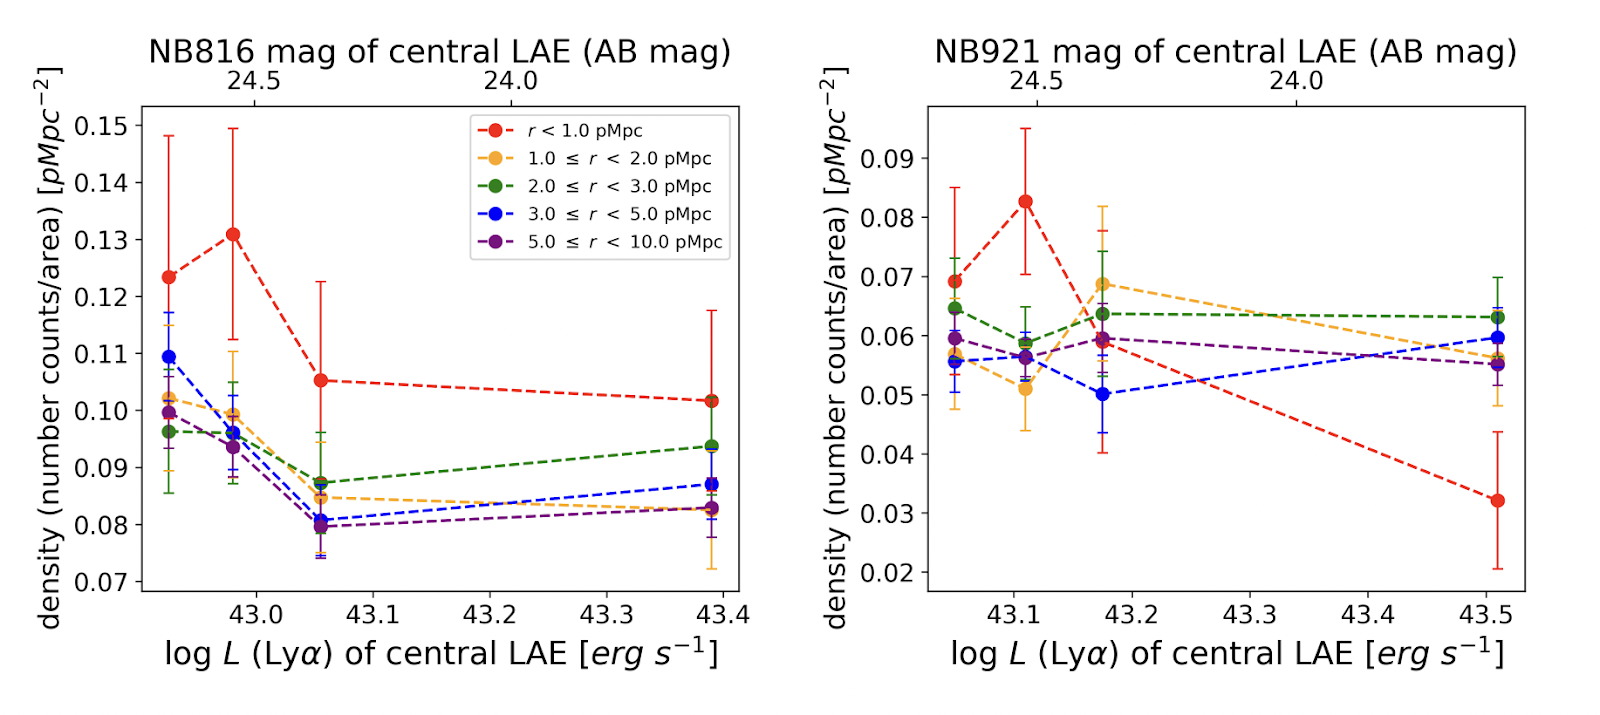 Two panel figure showing the density of faint LAEs within rings versus the brightness of the central LAE. The two panels represent the different redshift samples. The left panel (lower redshift sample) shows a decrease with brightness while the right has a more constant trend.